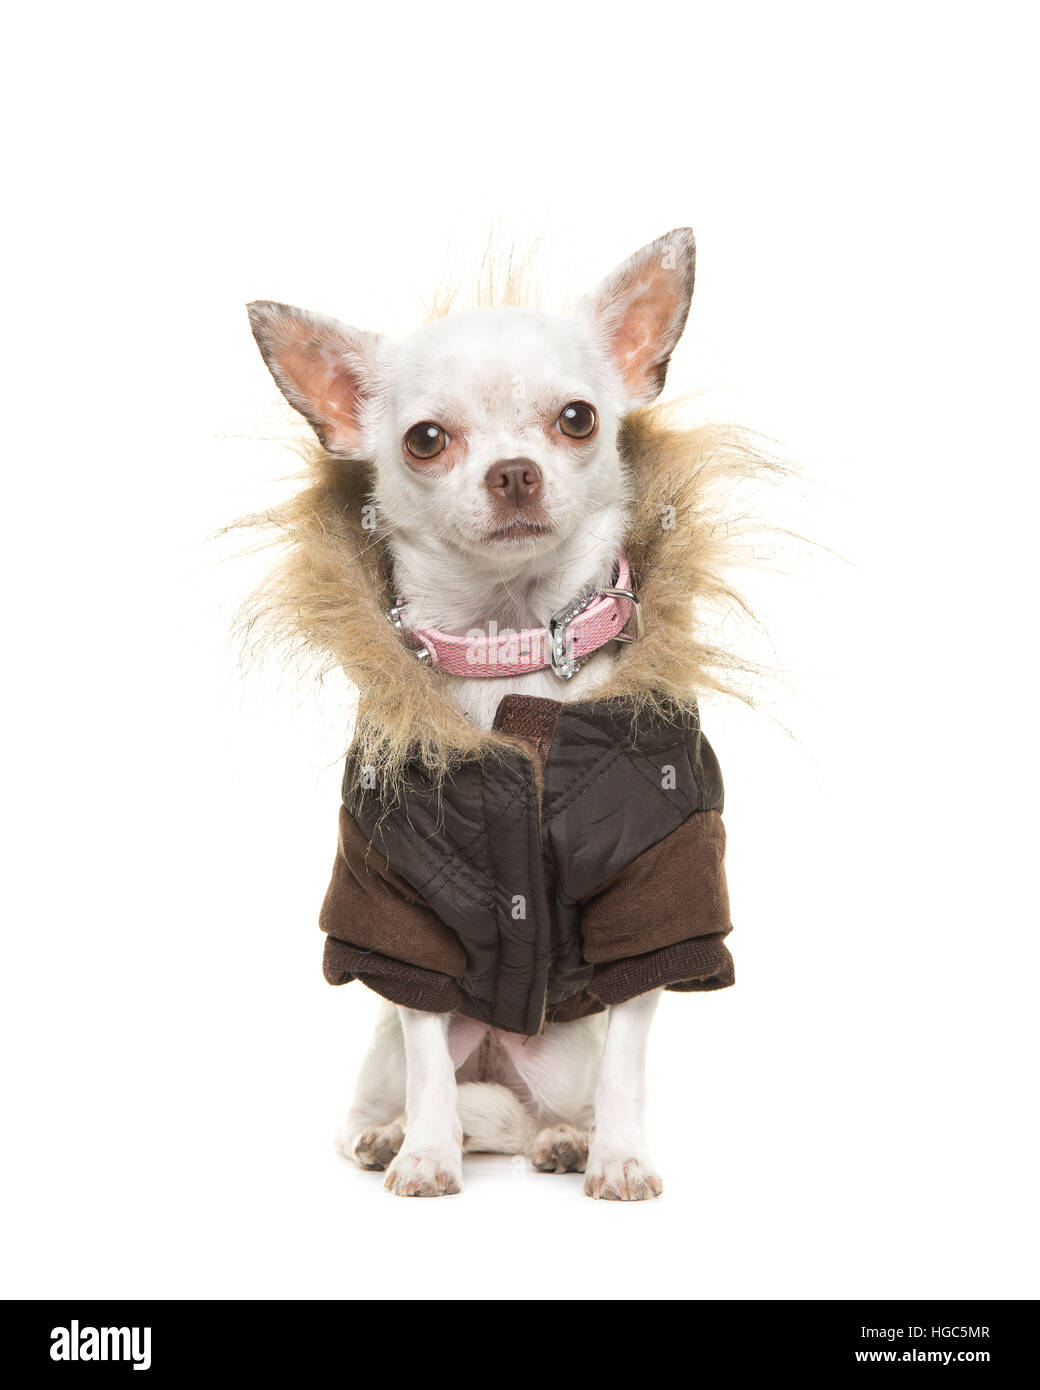 White chihuahua dog wearing a brown winter coat sitting and facing the camera isolated on a white background Stock Photo